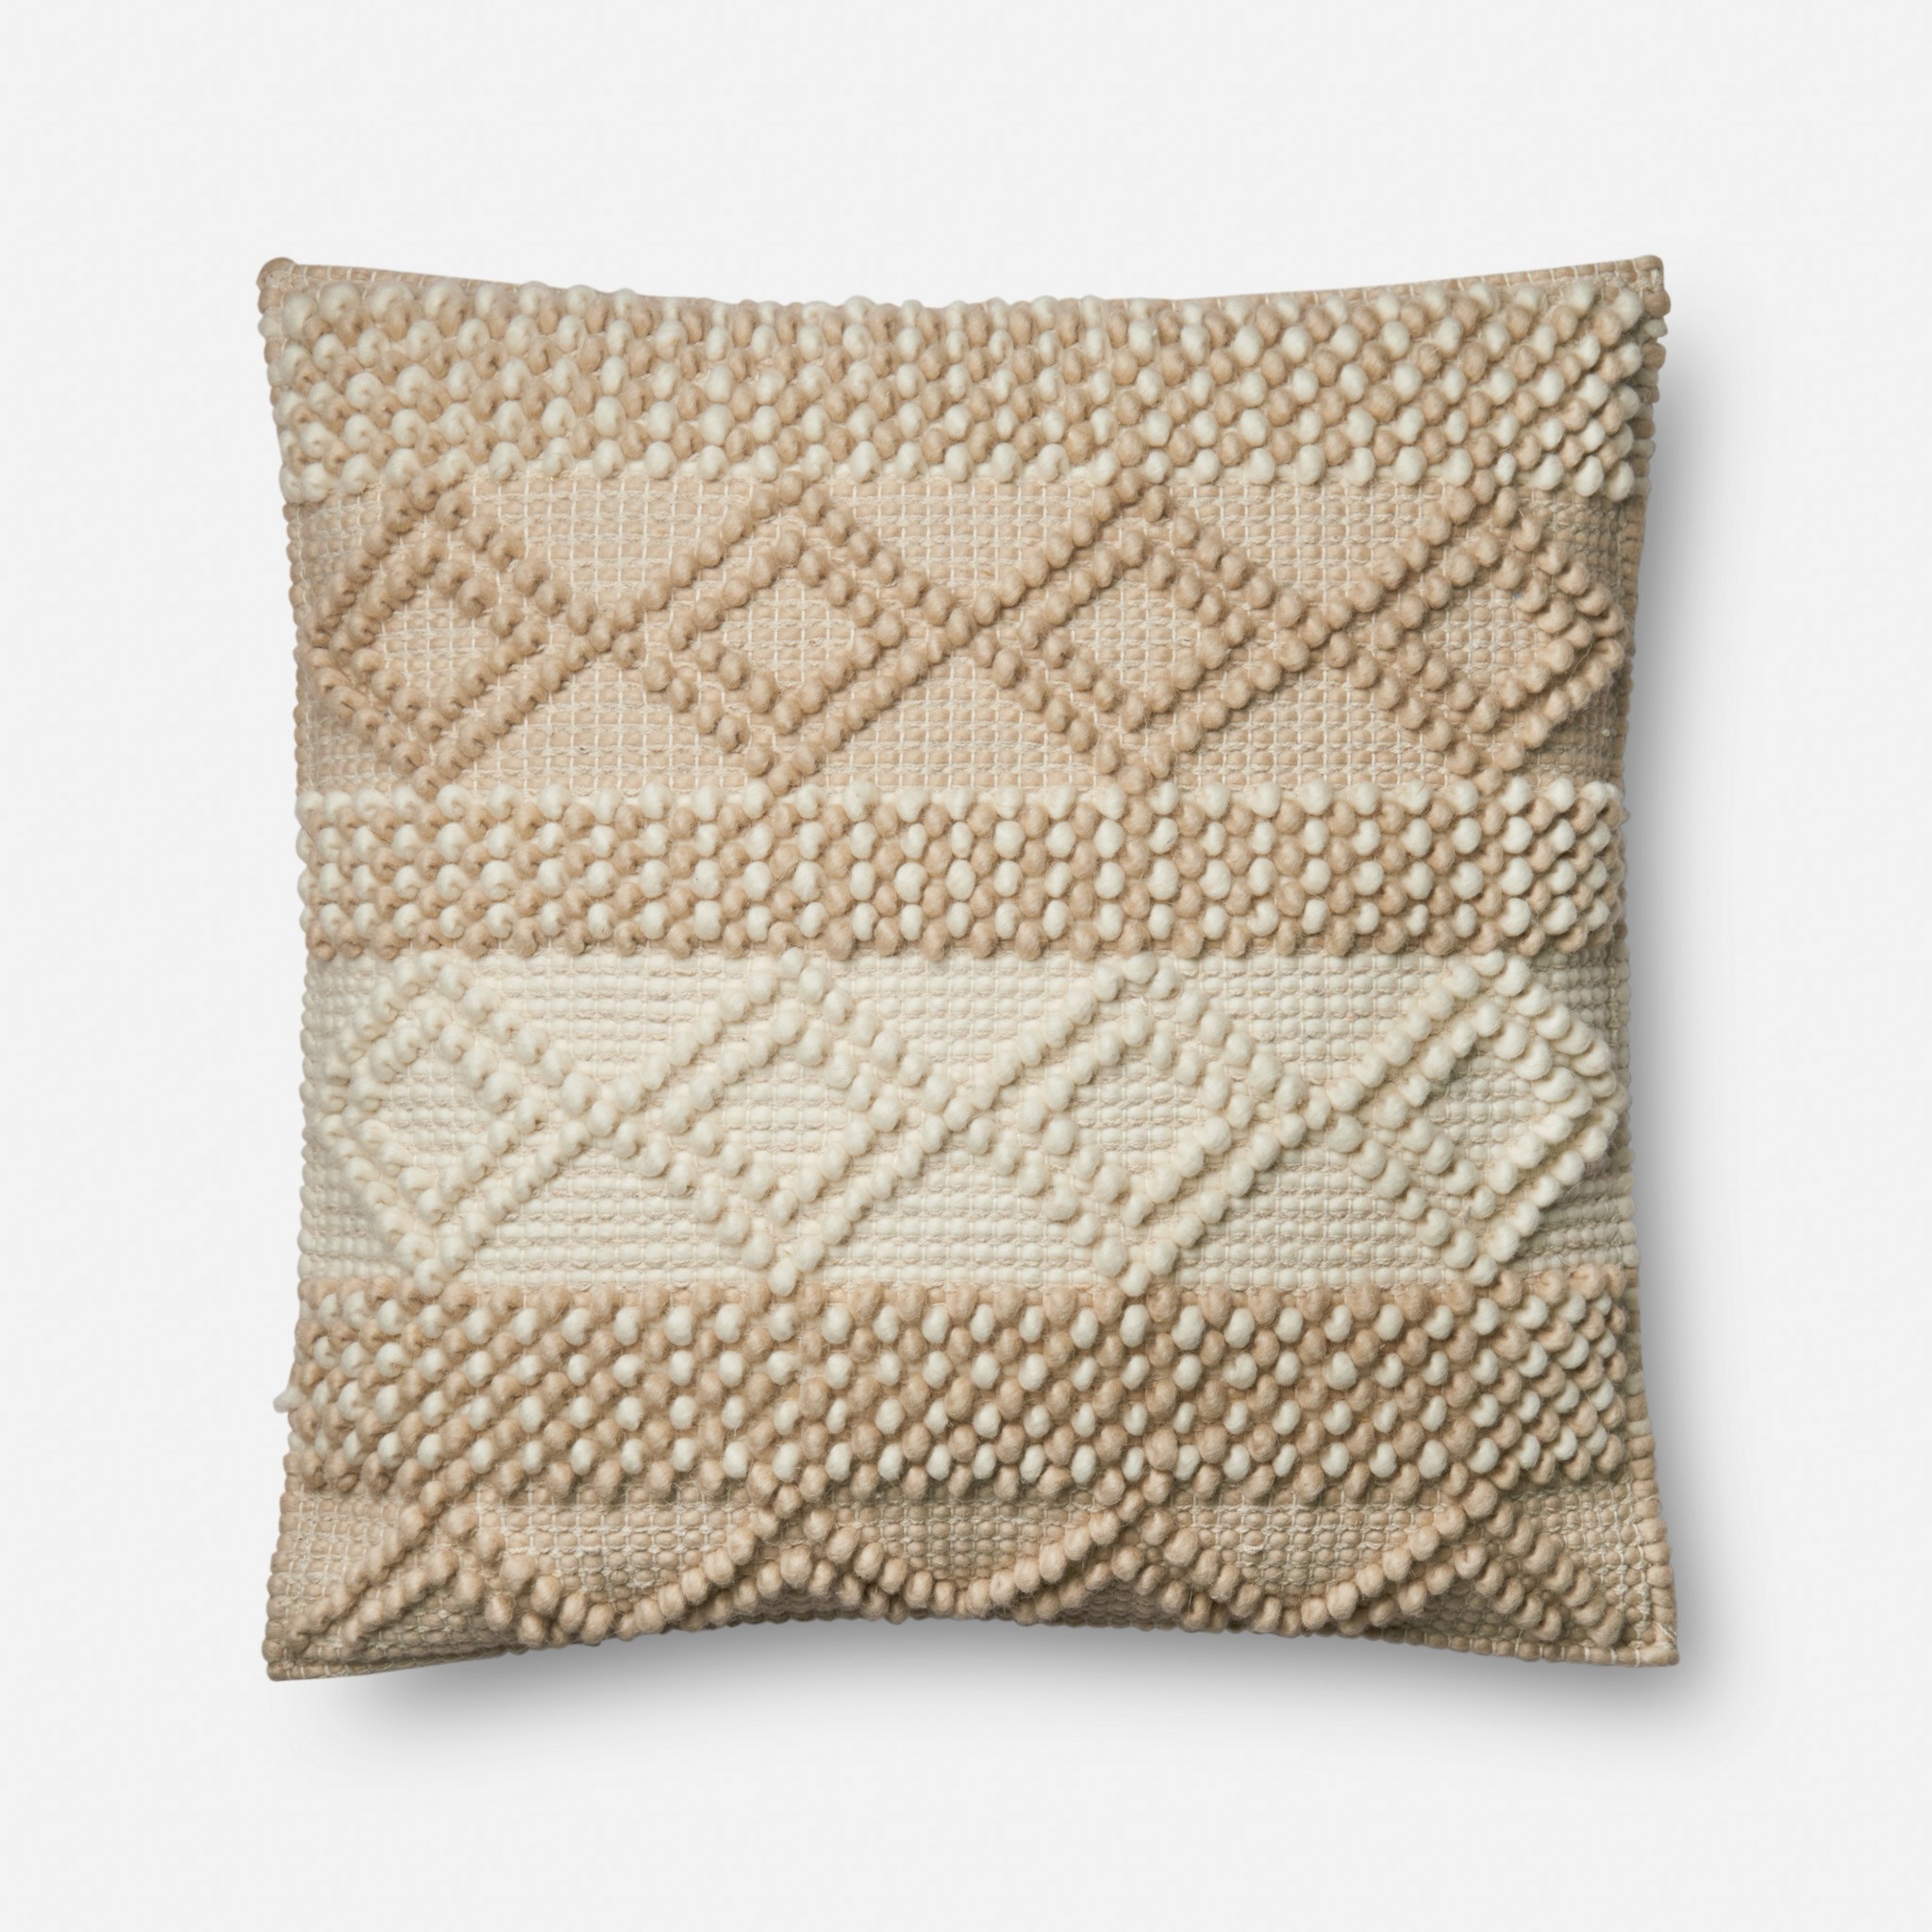 Magnolia Home by Joanna Gaines x Loloi Pillows P1051 Beige / Ivory 22" x 22" Cover Only - Image 0